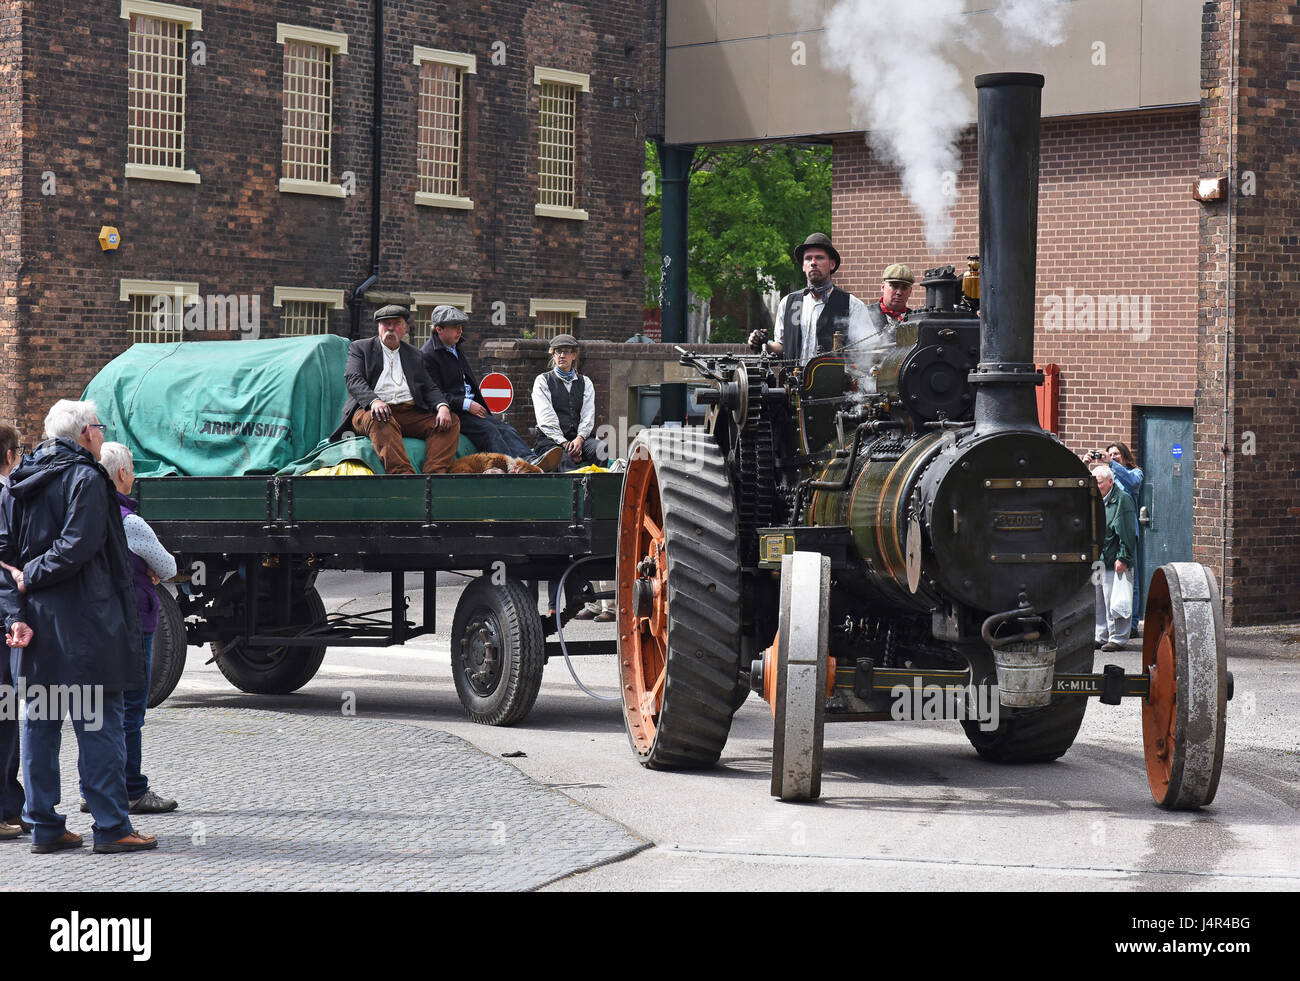 The historic streets of Ironbridge were turned back in time when 30 vintage steam engines rolled through the Gorge as part of the Ironbridge Gorge Museums 50th aniversary celebrations. Credit: David Bagnall/Alamy Live News Stock Photo